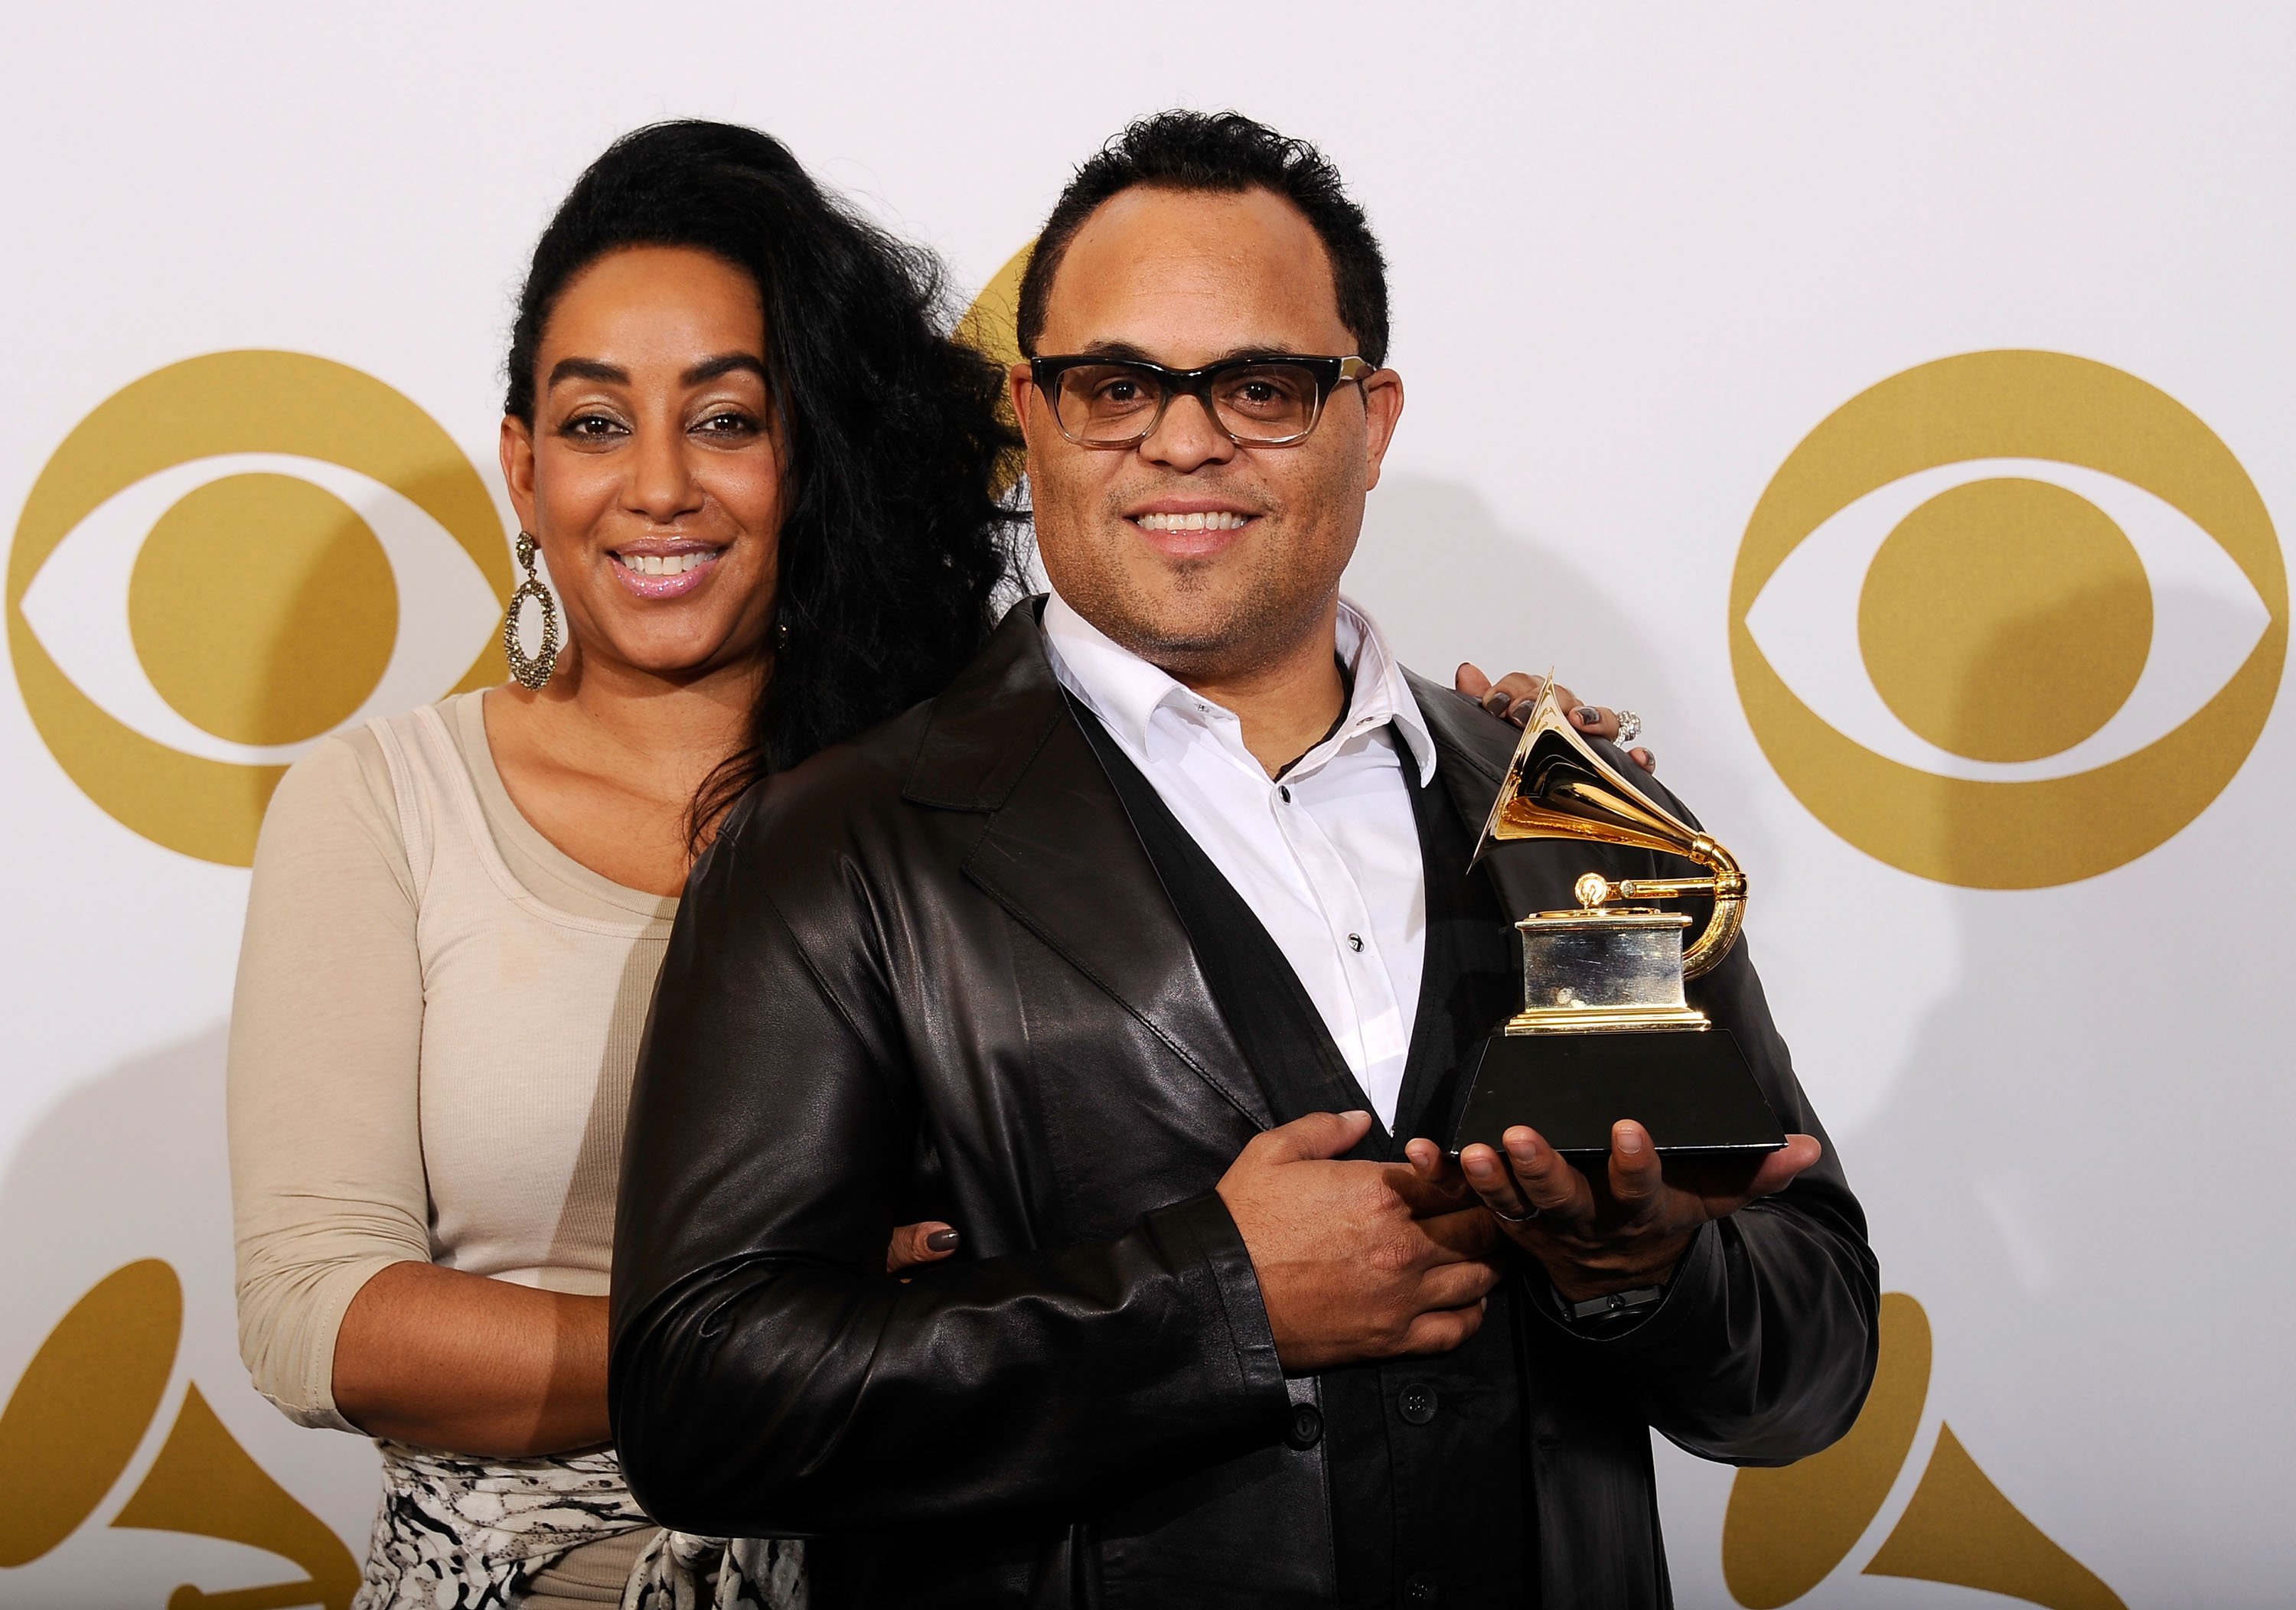 Meleasa and Israel Houghton at The 53rd Annual GRAMMY Awards held at Staples Center on February 13, 2011, in Los Angeles, California. | Source: Getty Images